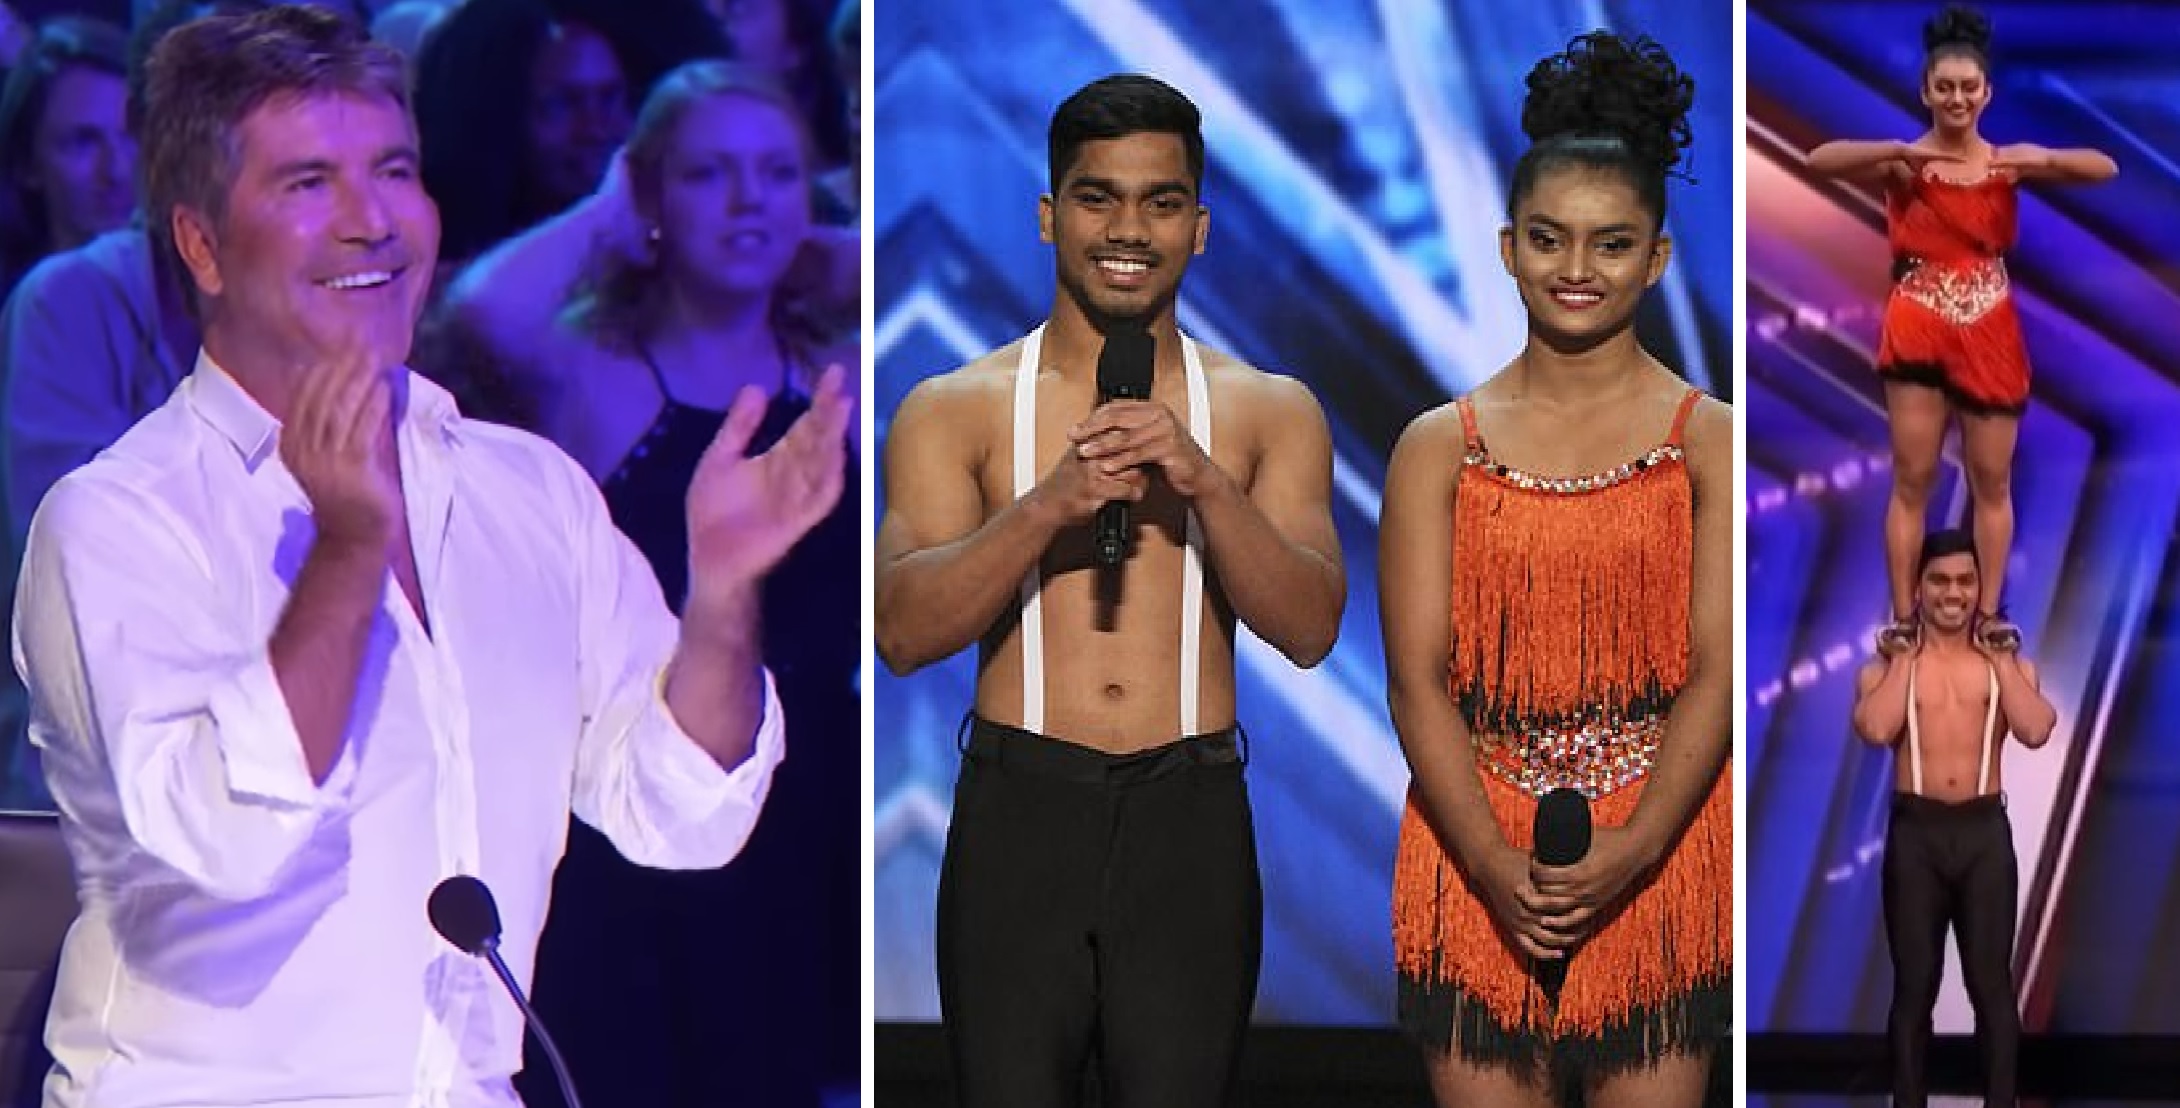 Indian Dancing Duo WOW Judges On America’s Got Talent, Receive Standing Ovation